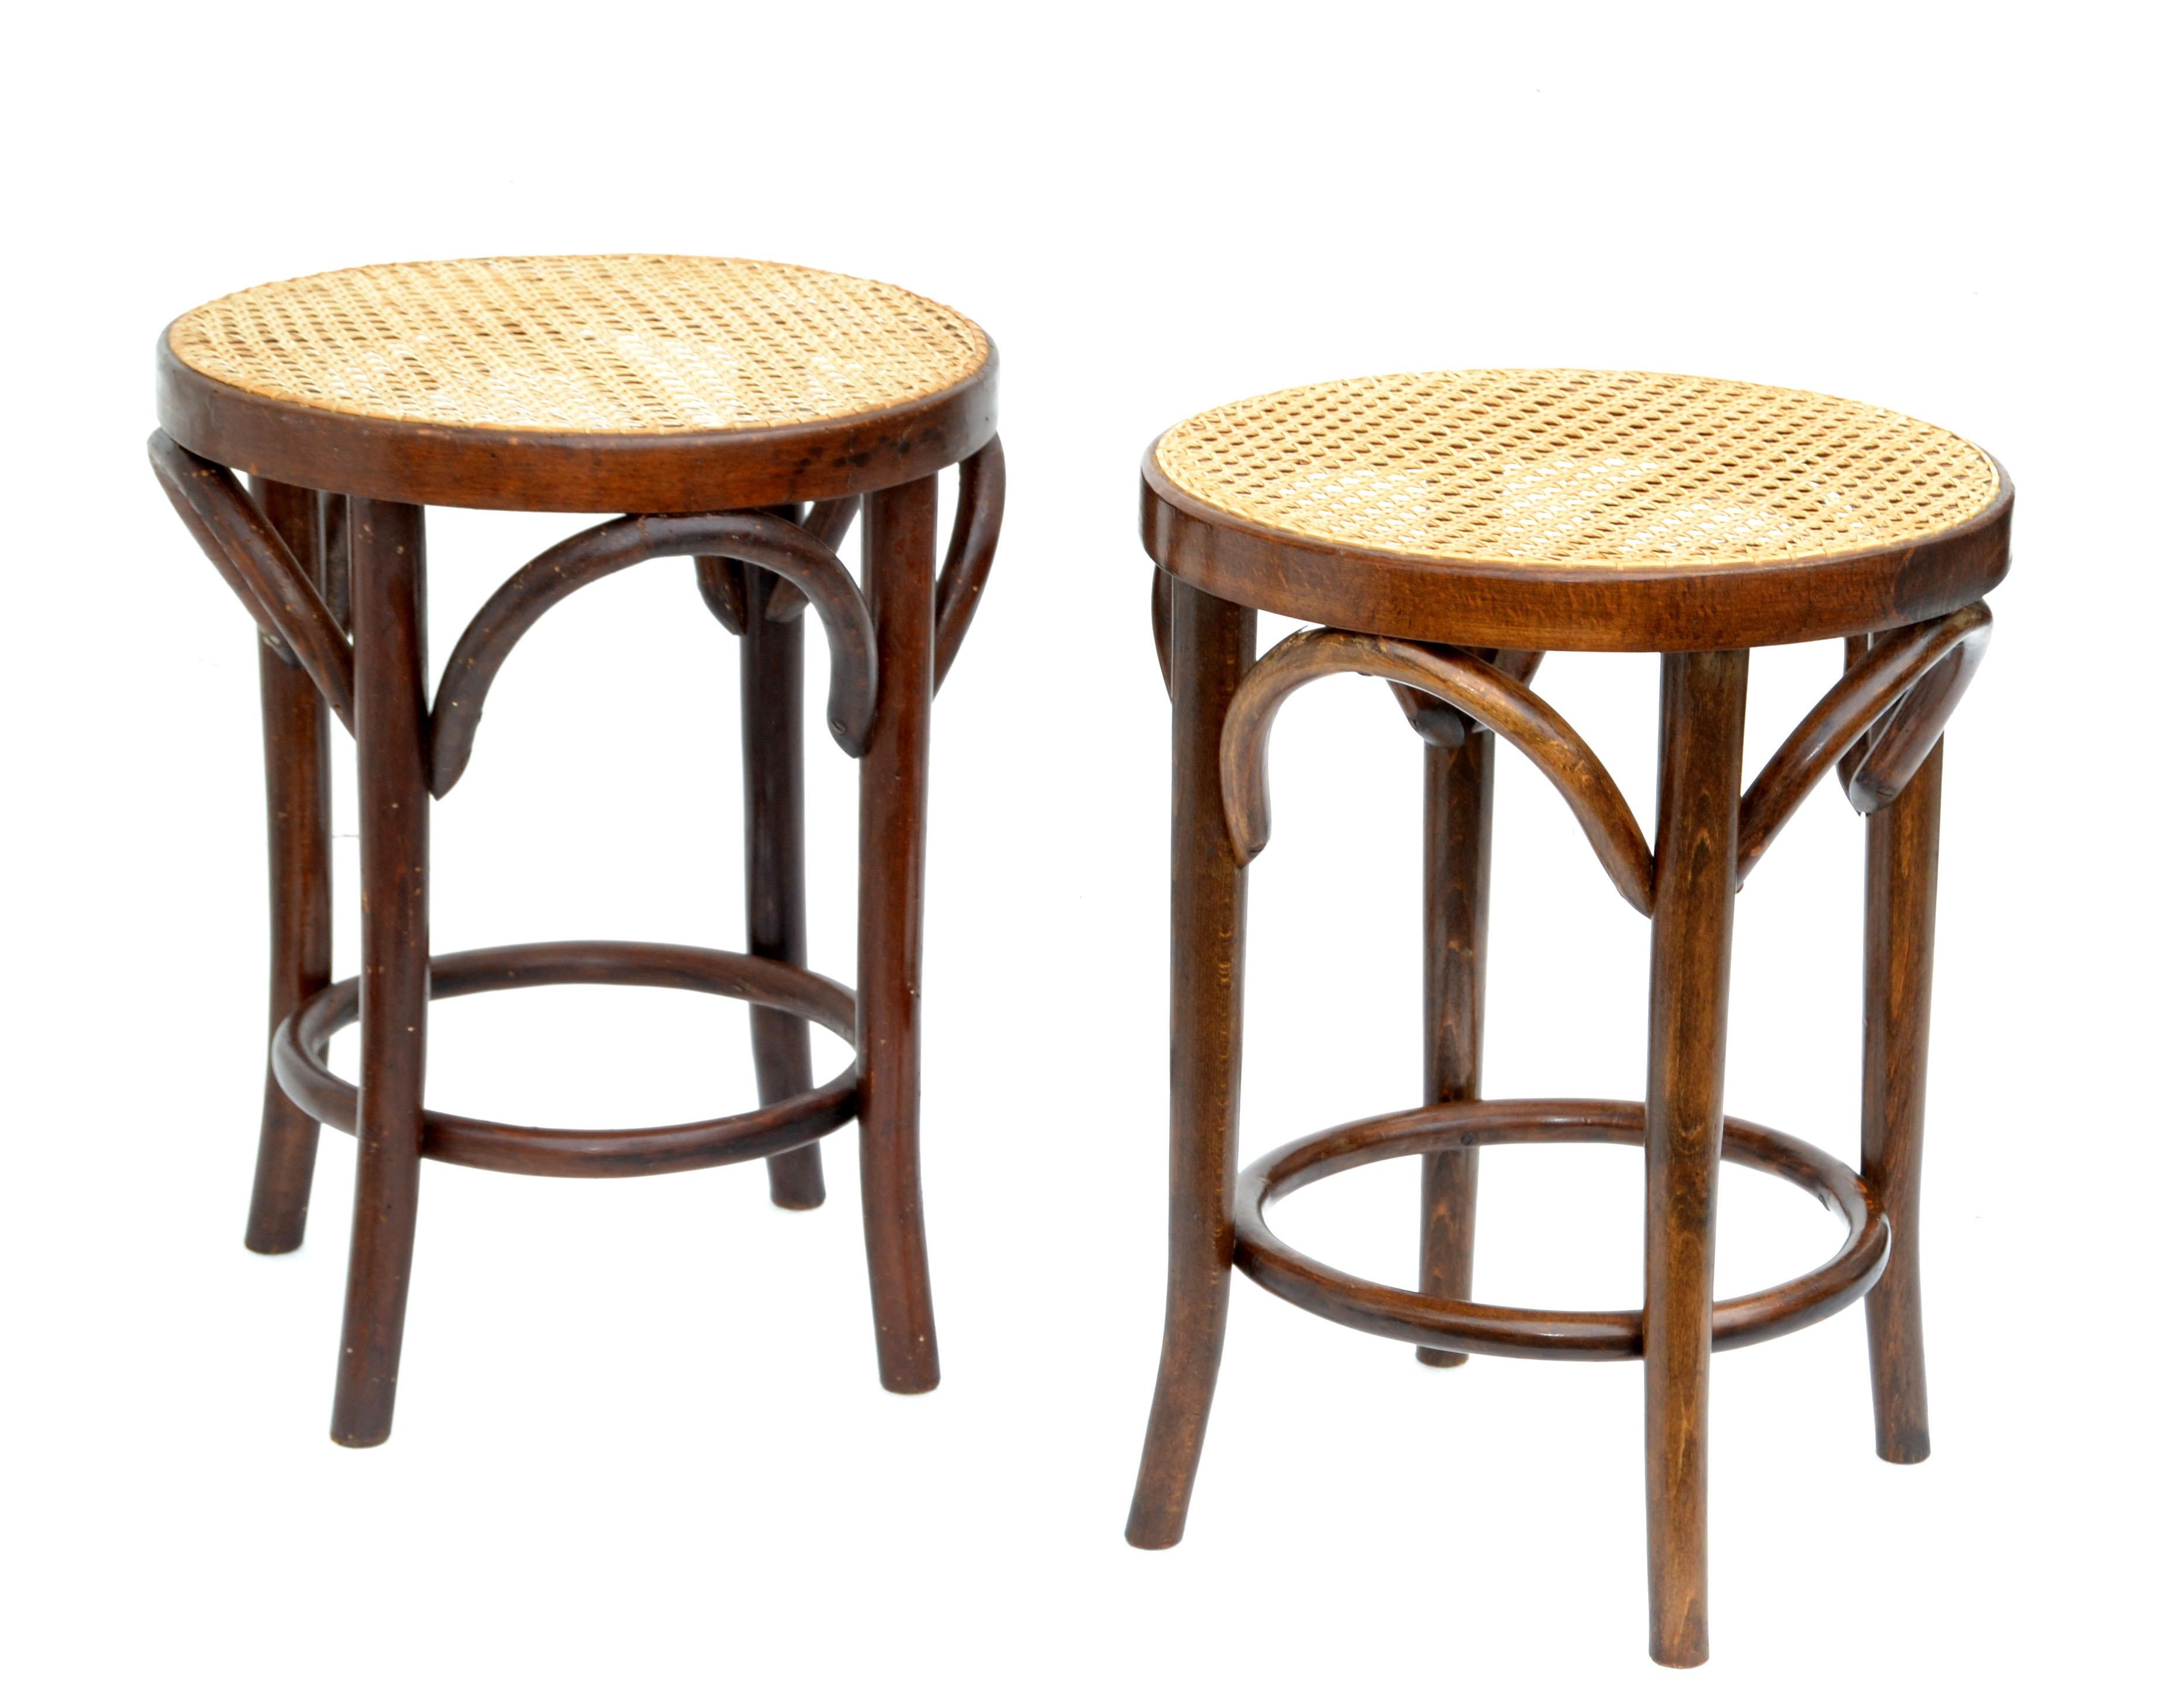 Set of two bentwood beech Michael Thonet style stools with the original handwoven cane seat.
In all original condition with some wear to the wood.
Caning of seats are perfect, no breaks.